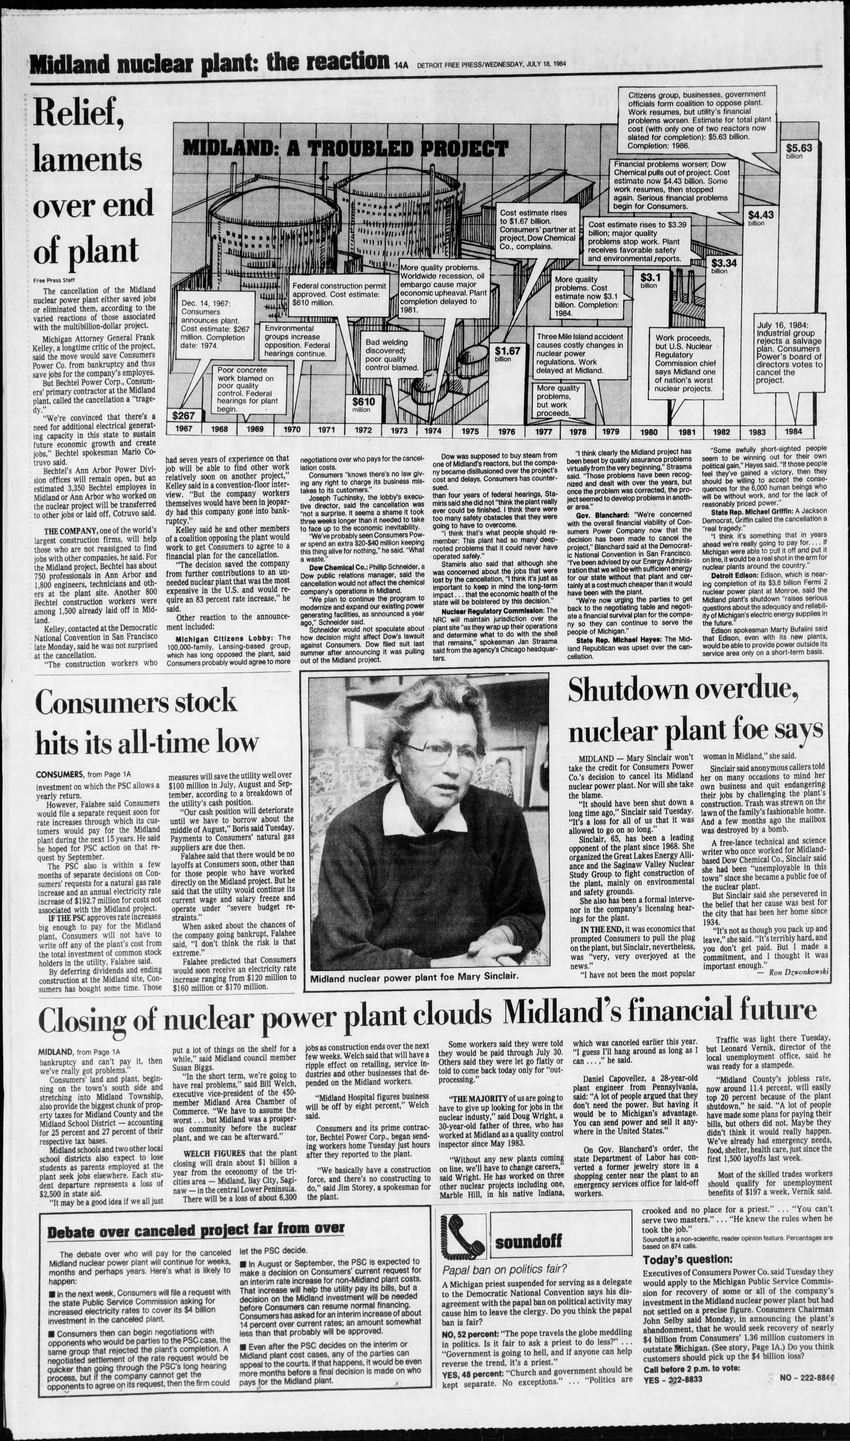 Midland Nuclear Power Plant (Cancelled) - July 1984 Repercussions From Cancellation